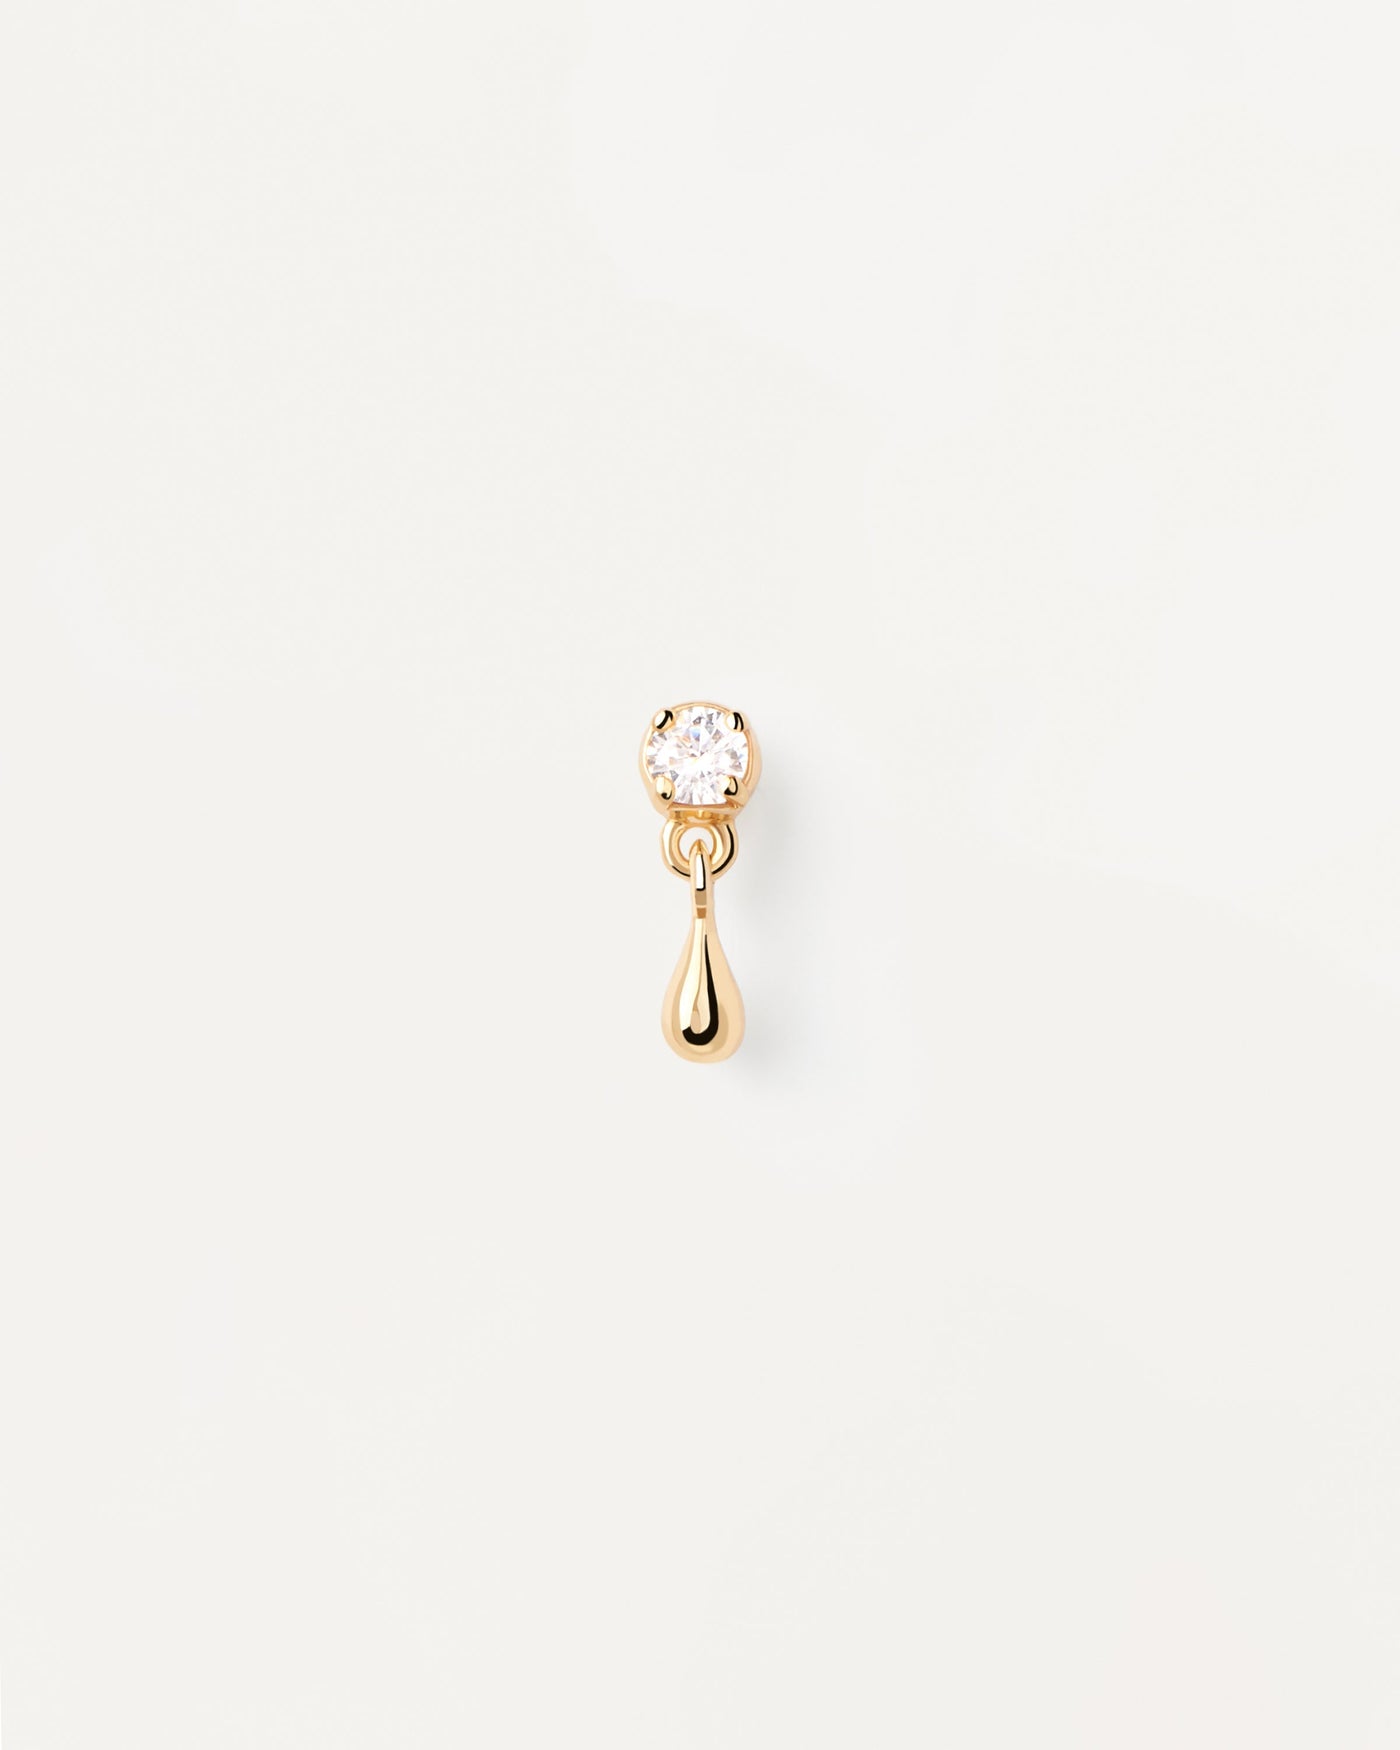 2023 Selection | Water single stud Earring. Gold-plated silver ear piercing with white zirconia and small drop pendant. Get the latest arrival from PDPAOLA. Place your order safely and get this Best Seller. Free Shipping.